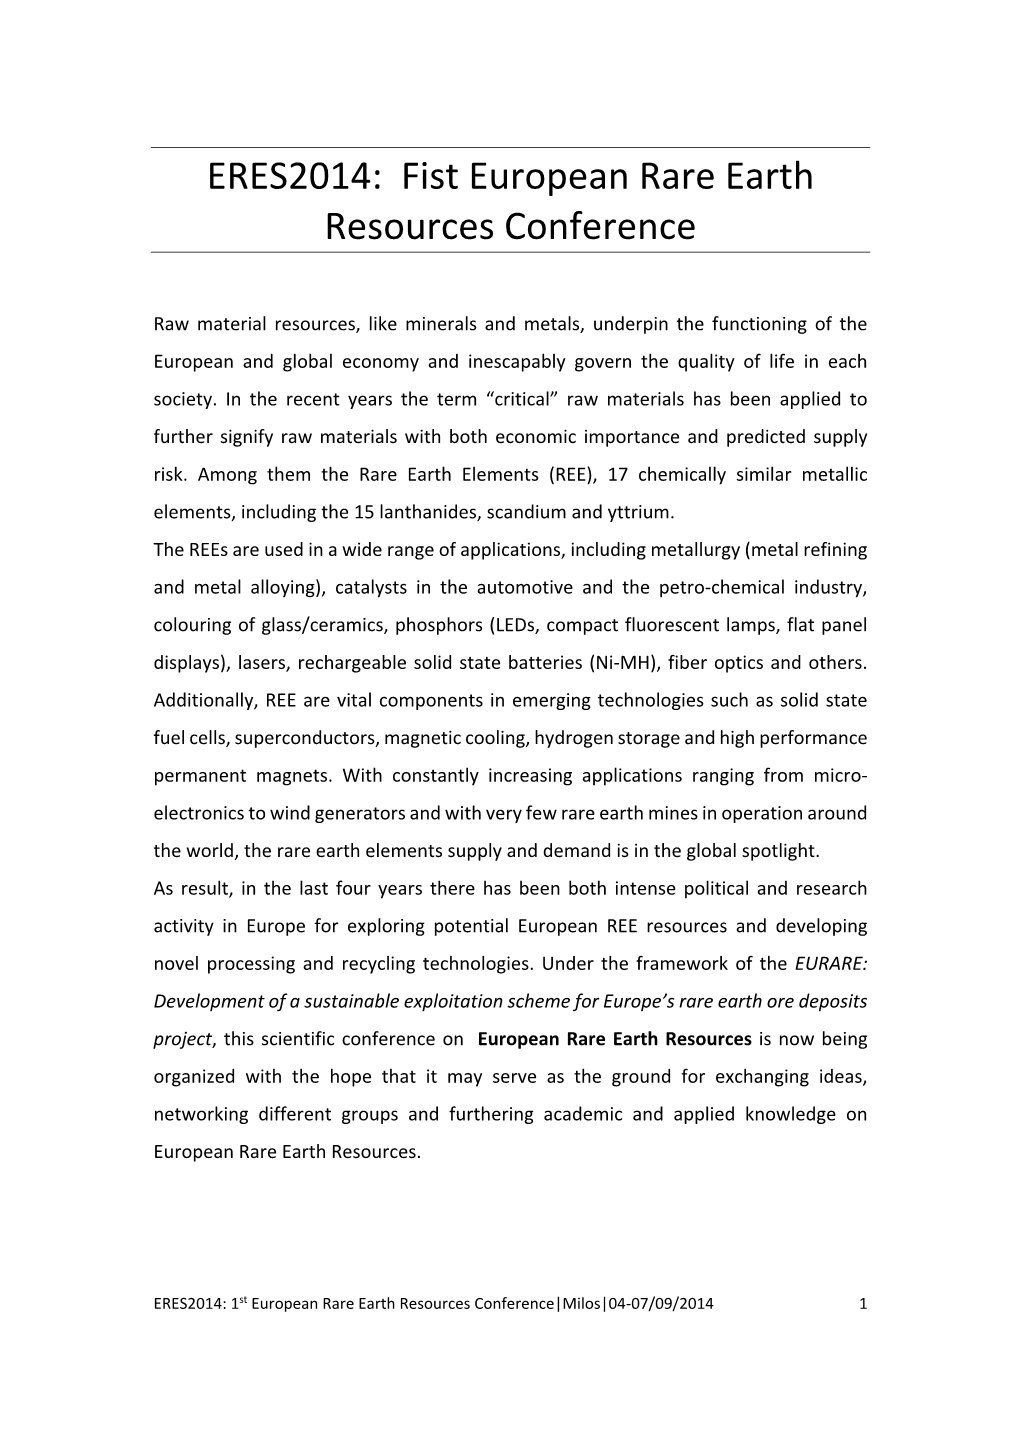 ERES2014: Fist European Rare Earth Resources Conference